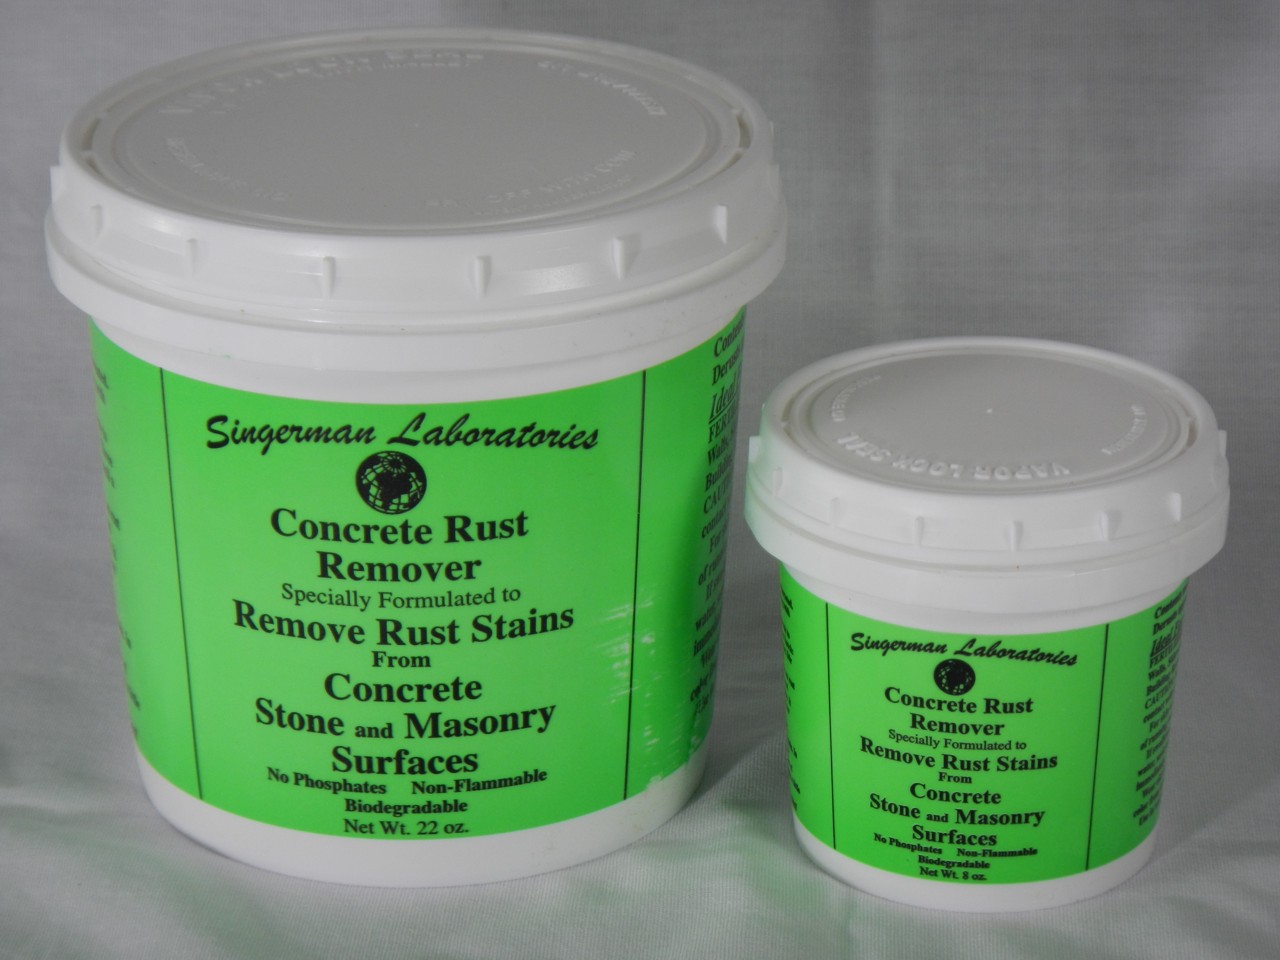 Which rust remover and natural stone sealers do you recommend?